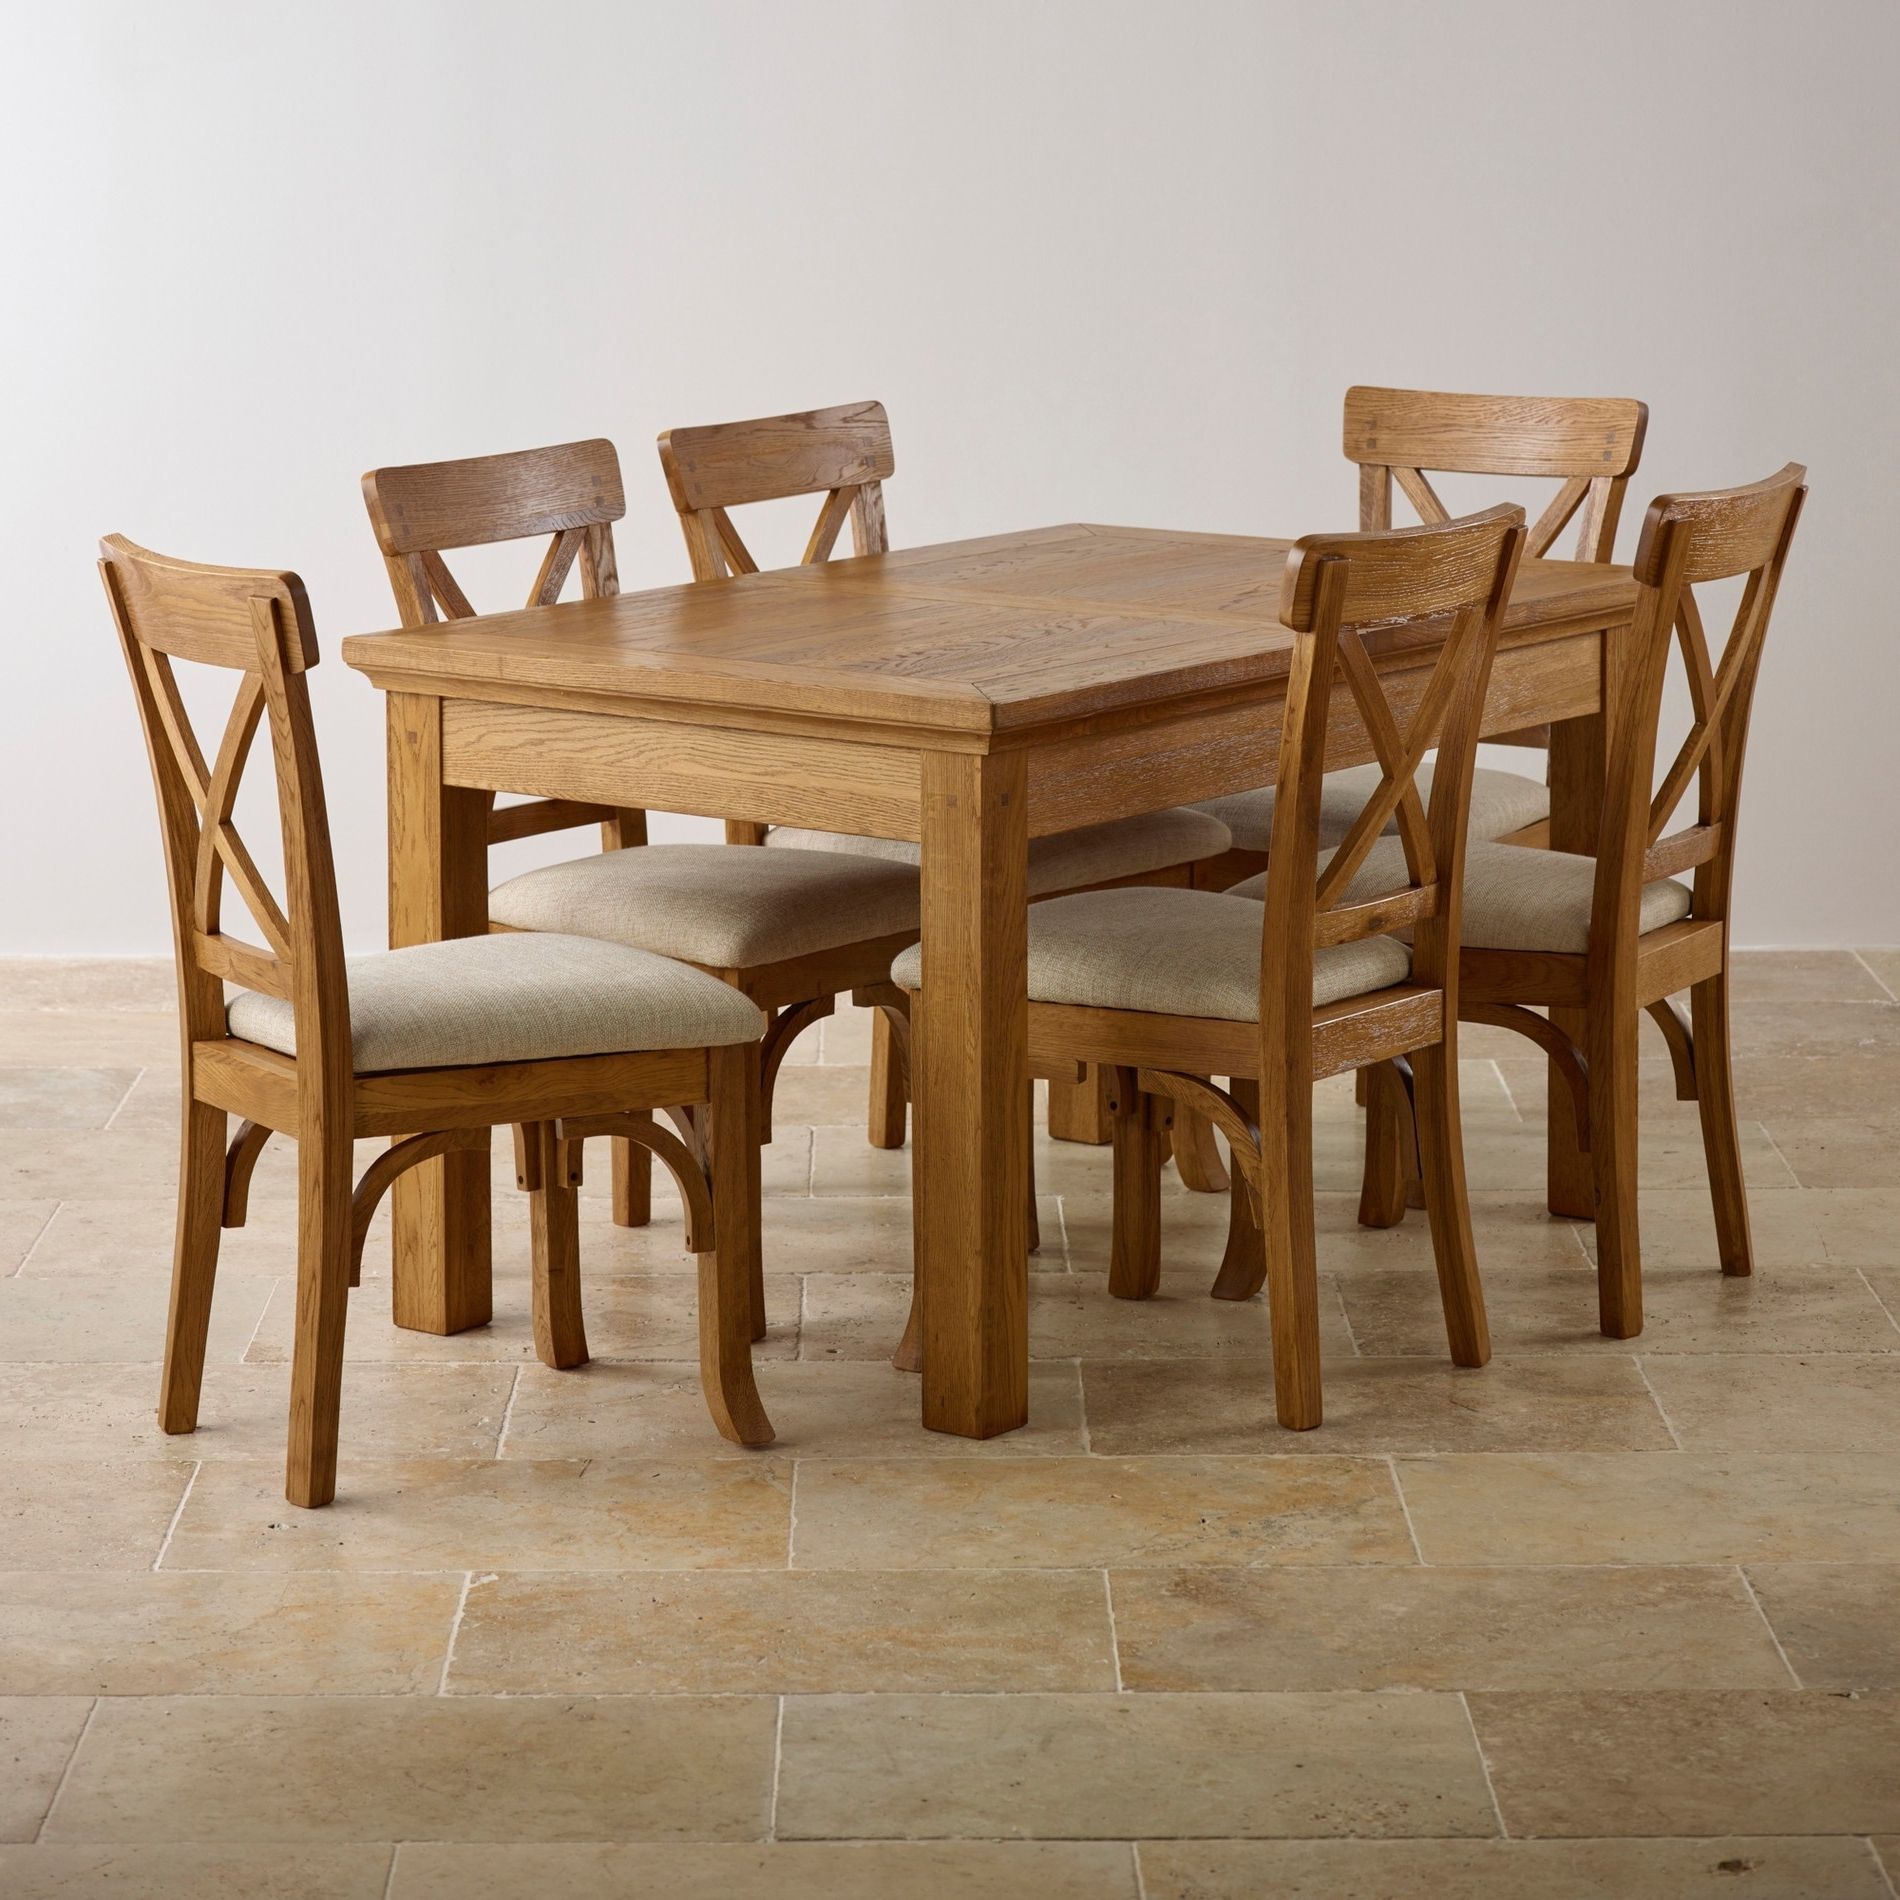 Most Popular Long Dining Tables In 12 Foot Long Dining Table New Attractive Solid Wood Dining Room (View 5 of 25)